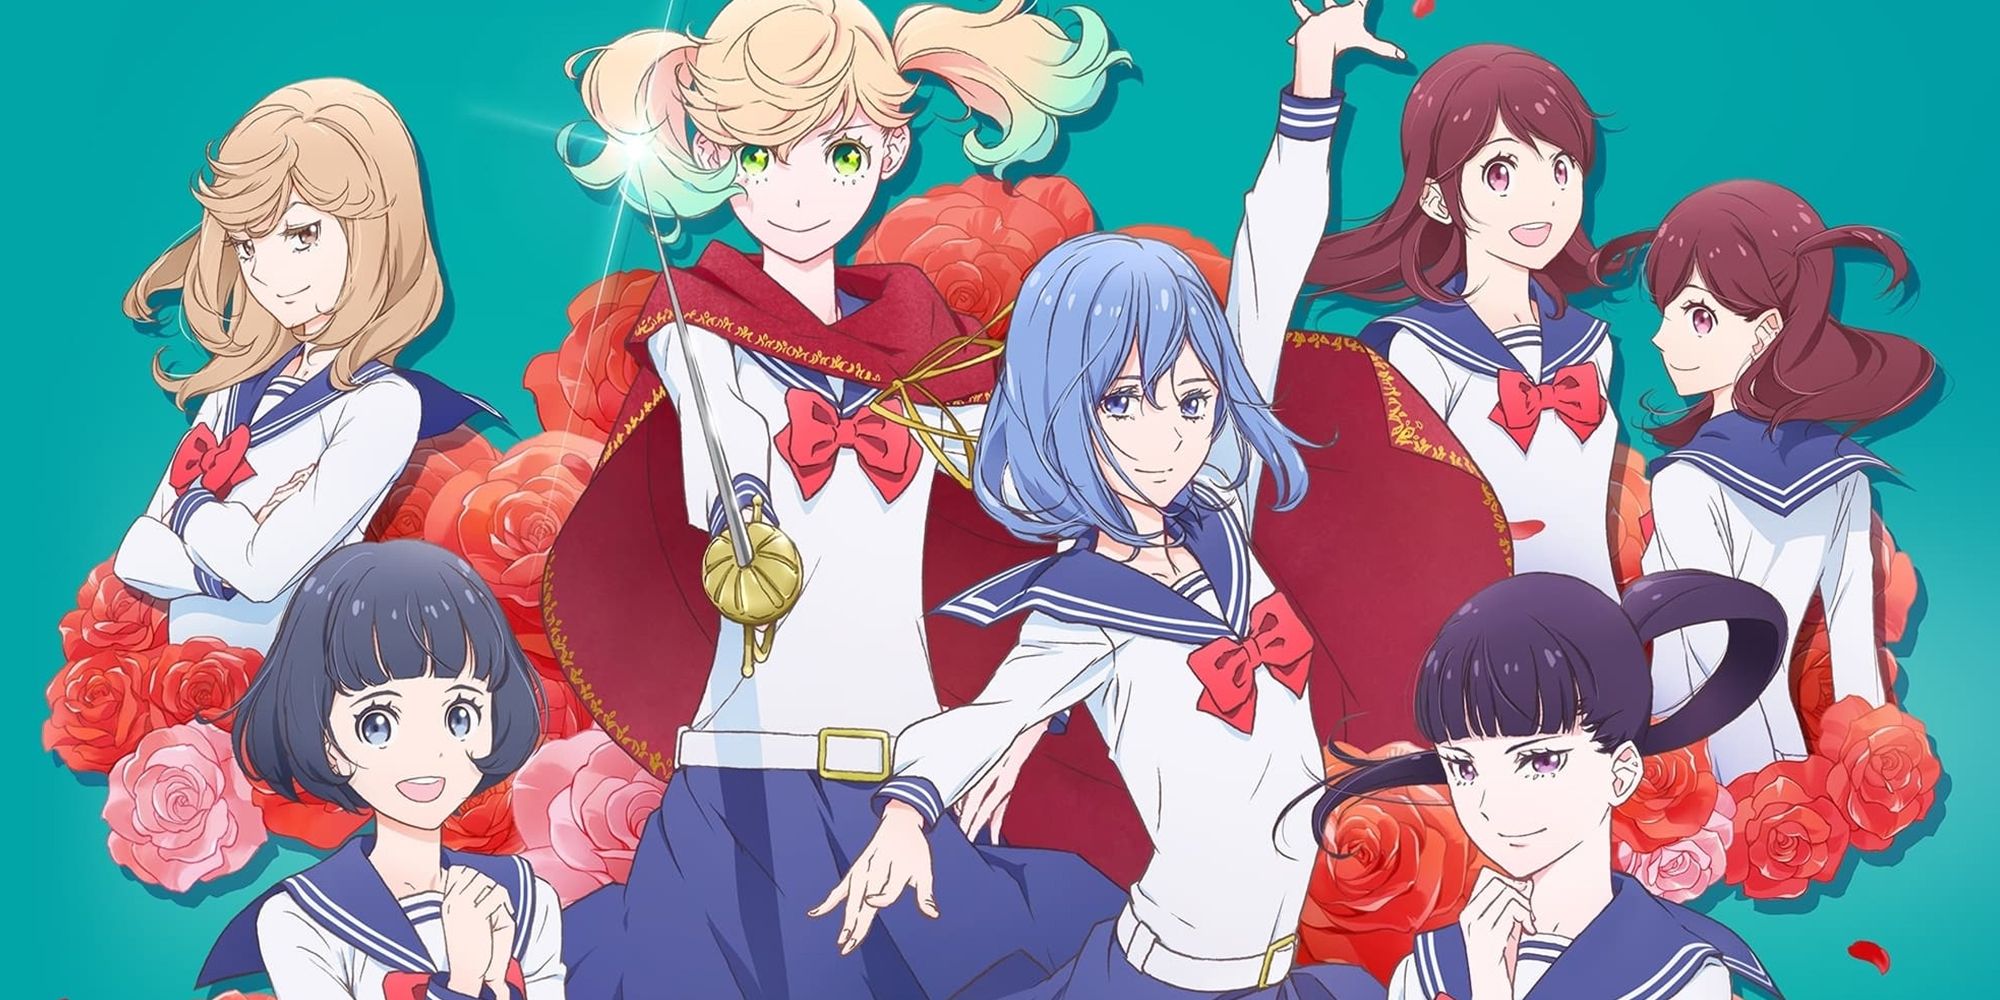 Kageki Shoujo - The Banner Art For The Anime With All Of The Main Cast Posing Together